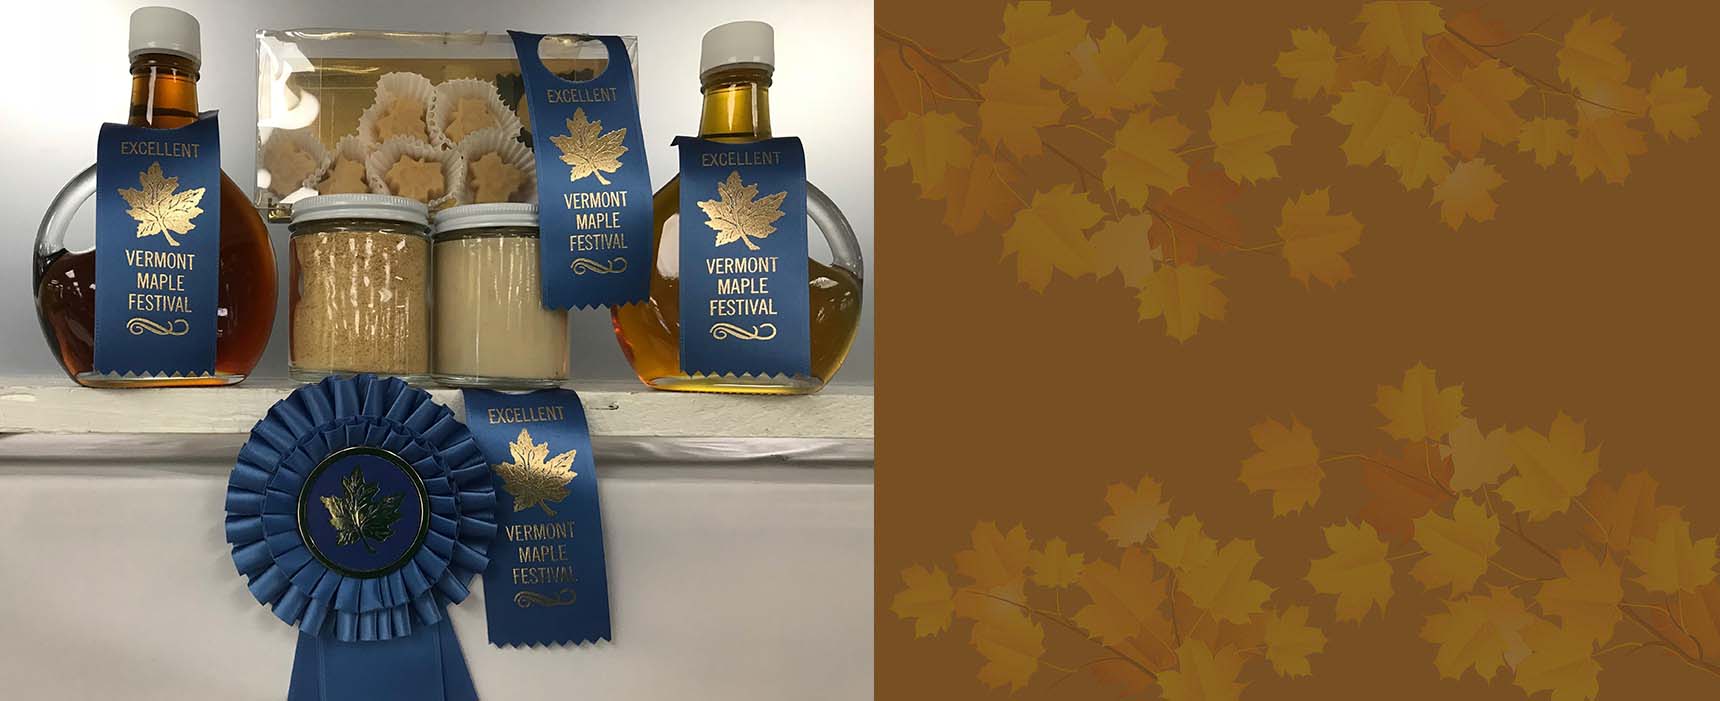 A close up of two bottles of maple syrup